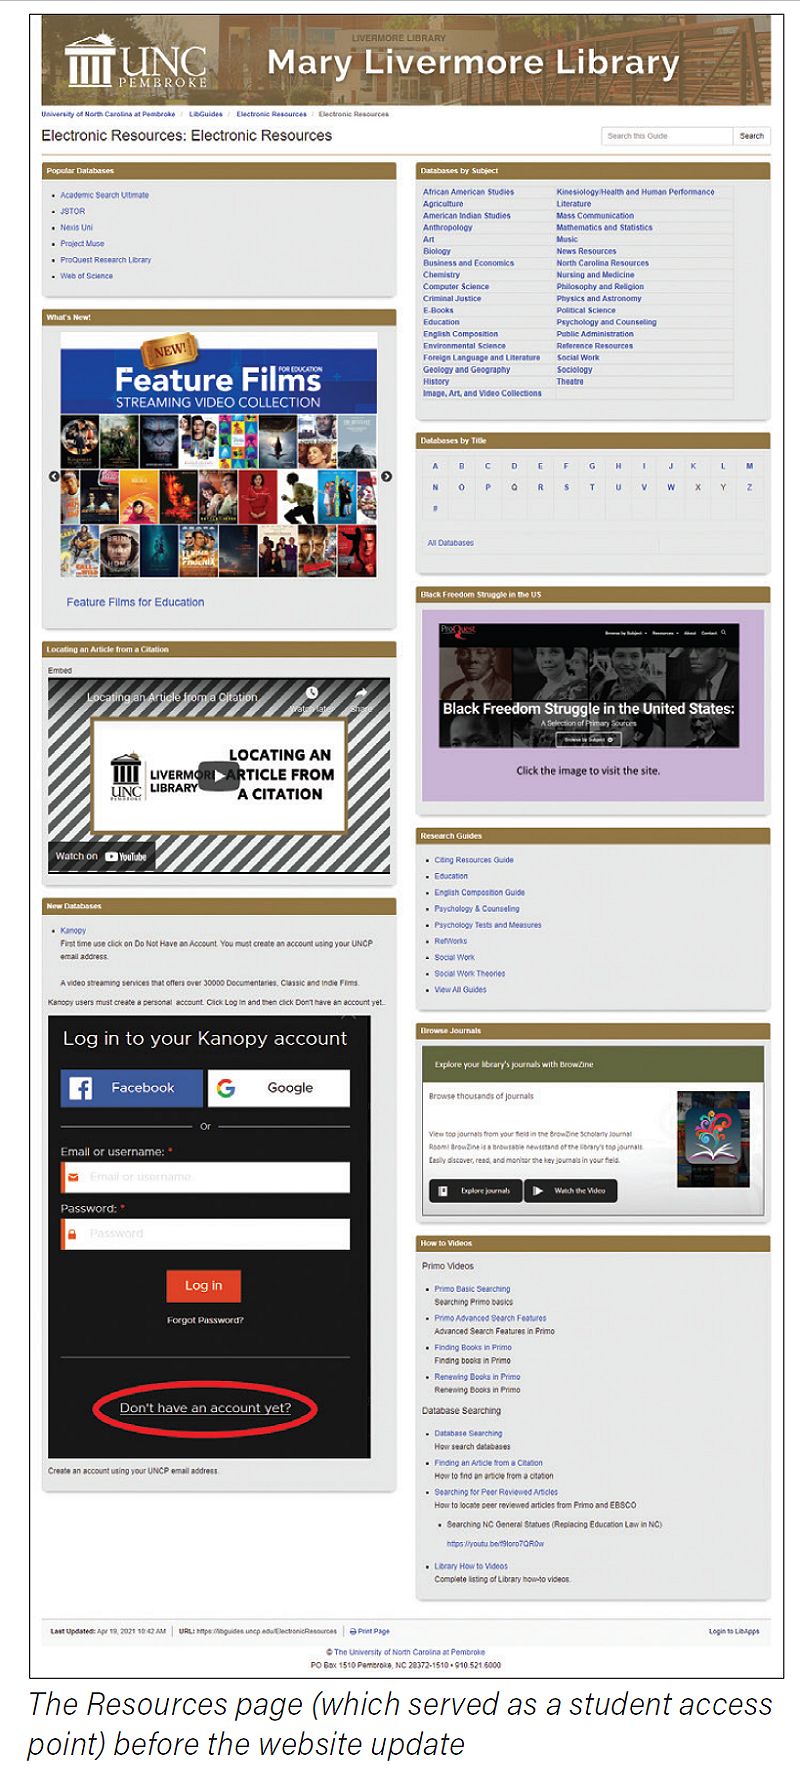 The Resources page (which served as a student access point) before the website update